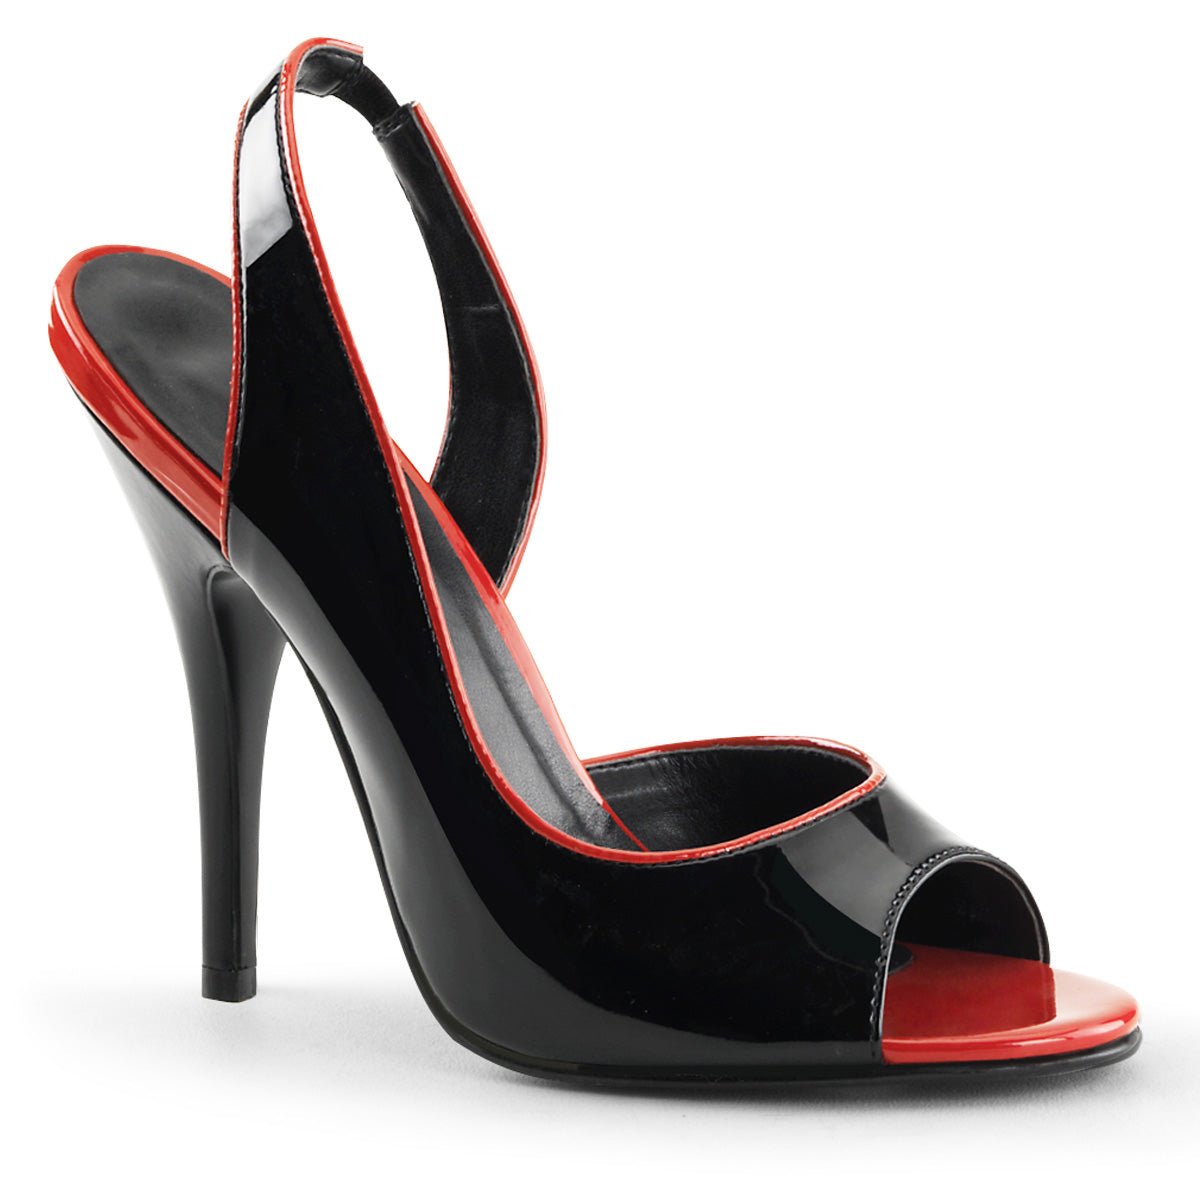 Clearance Pleaser Seduce 117 Black/Red Size 4UK/7USA - From Clearance Sold By Alternative Footwear